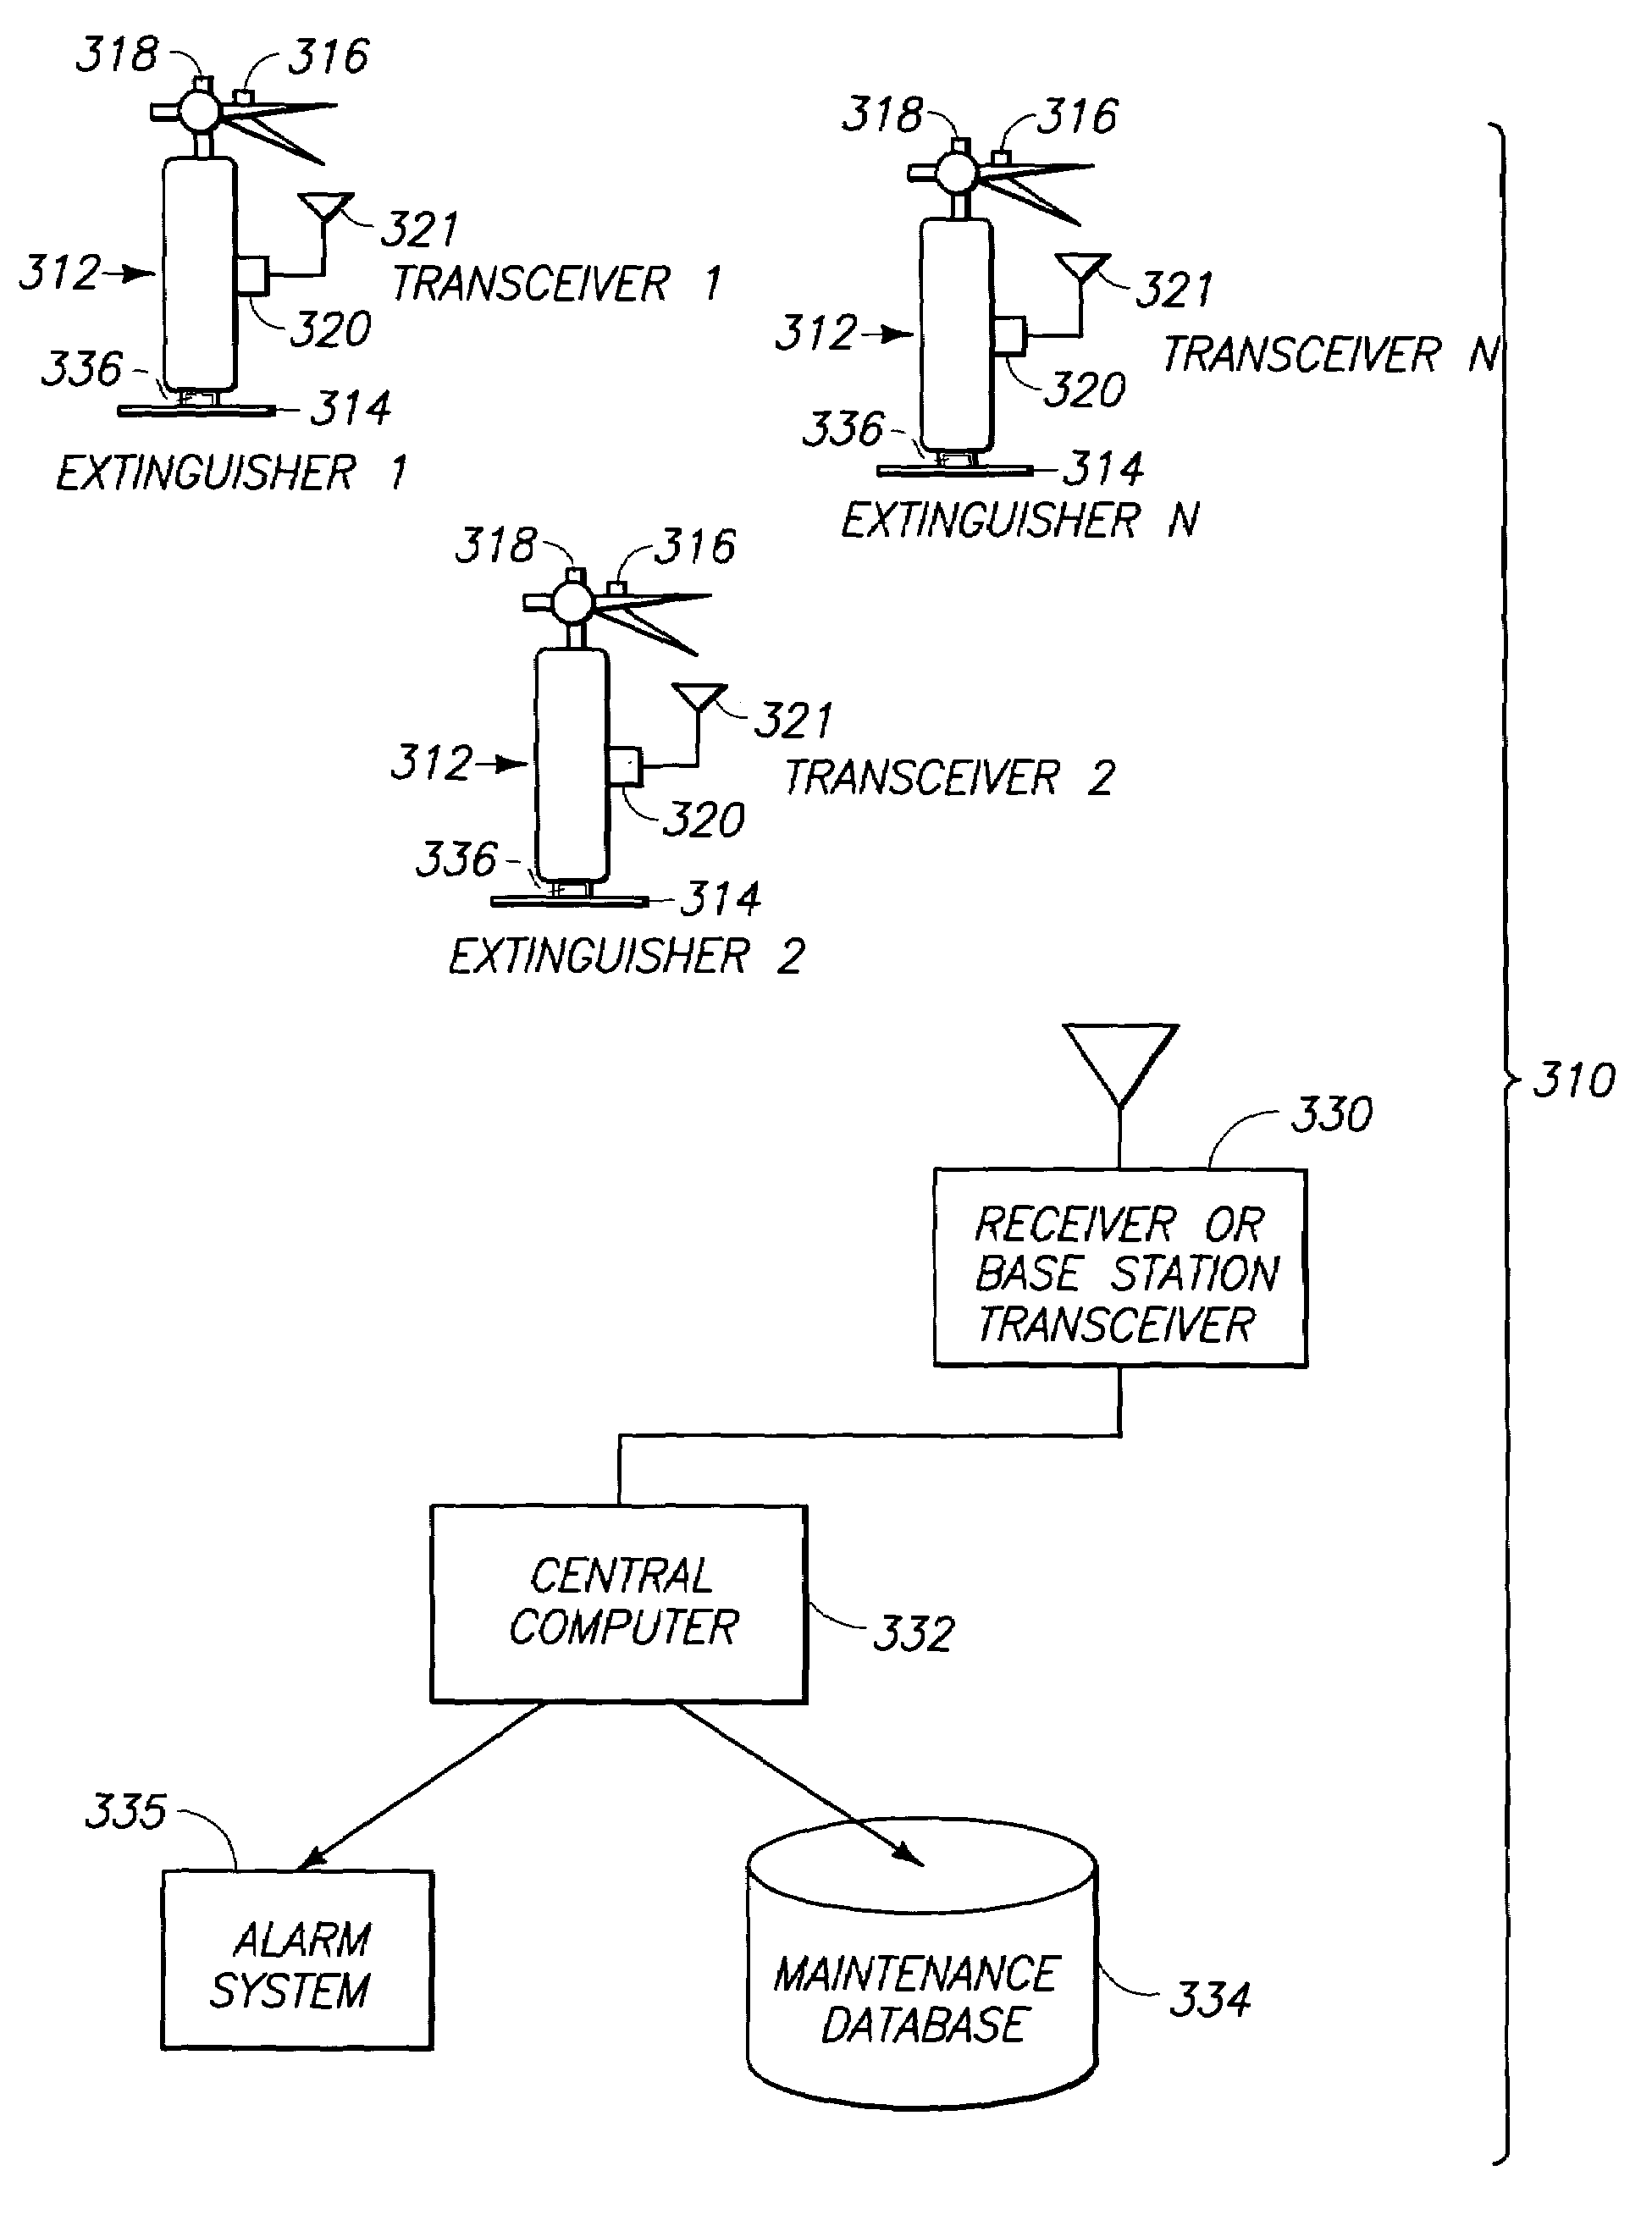 Radio frequency security system, method for a building facility or the like, and apparatus and methods for remotely monitoring the status of fire extinguishers